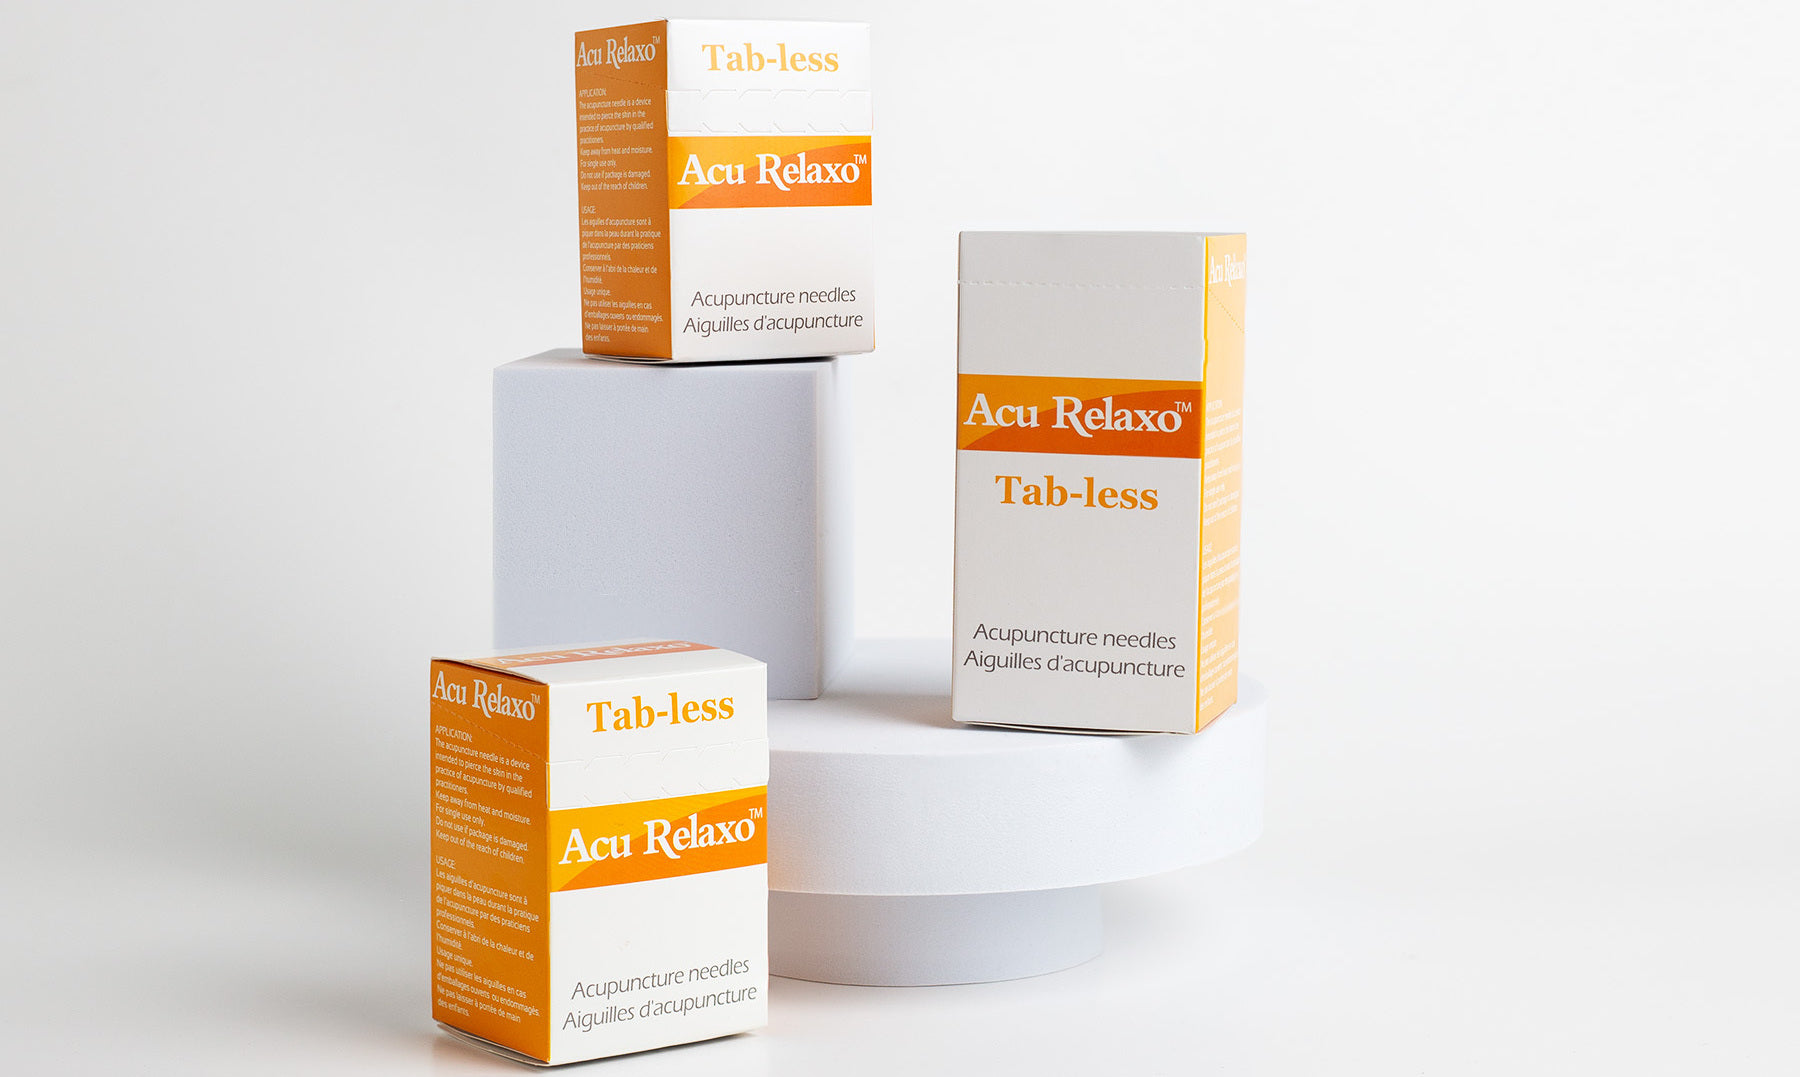 Upgrade Your Practice with Acu Relaxo Tab-less Acupuncture Needles